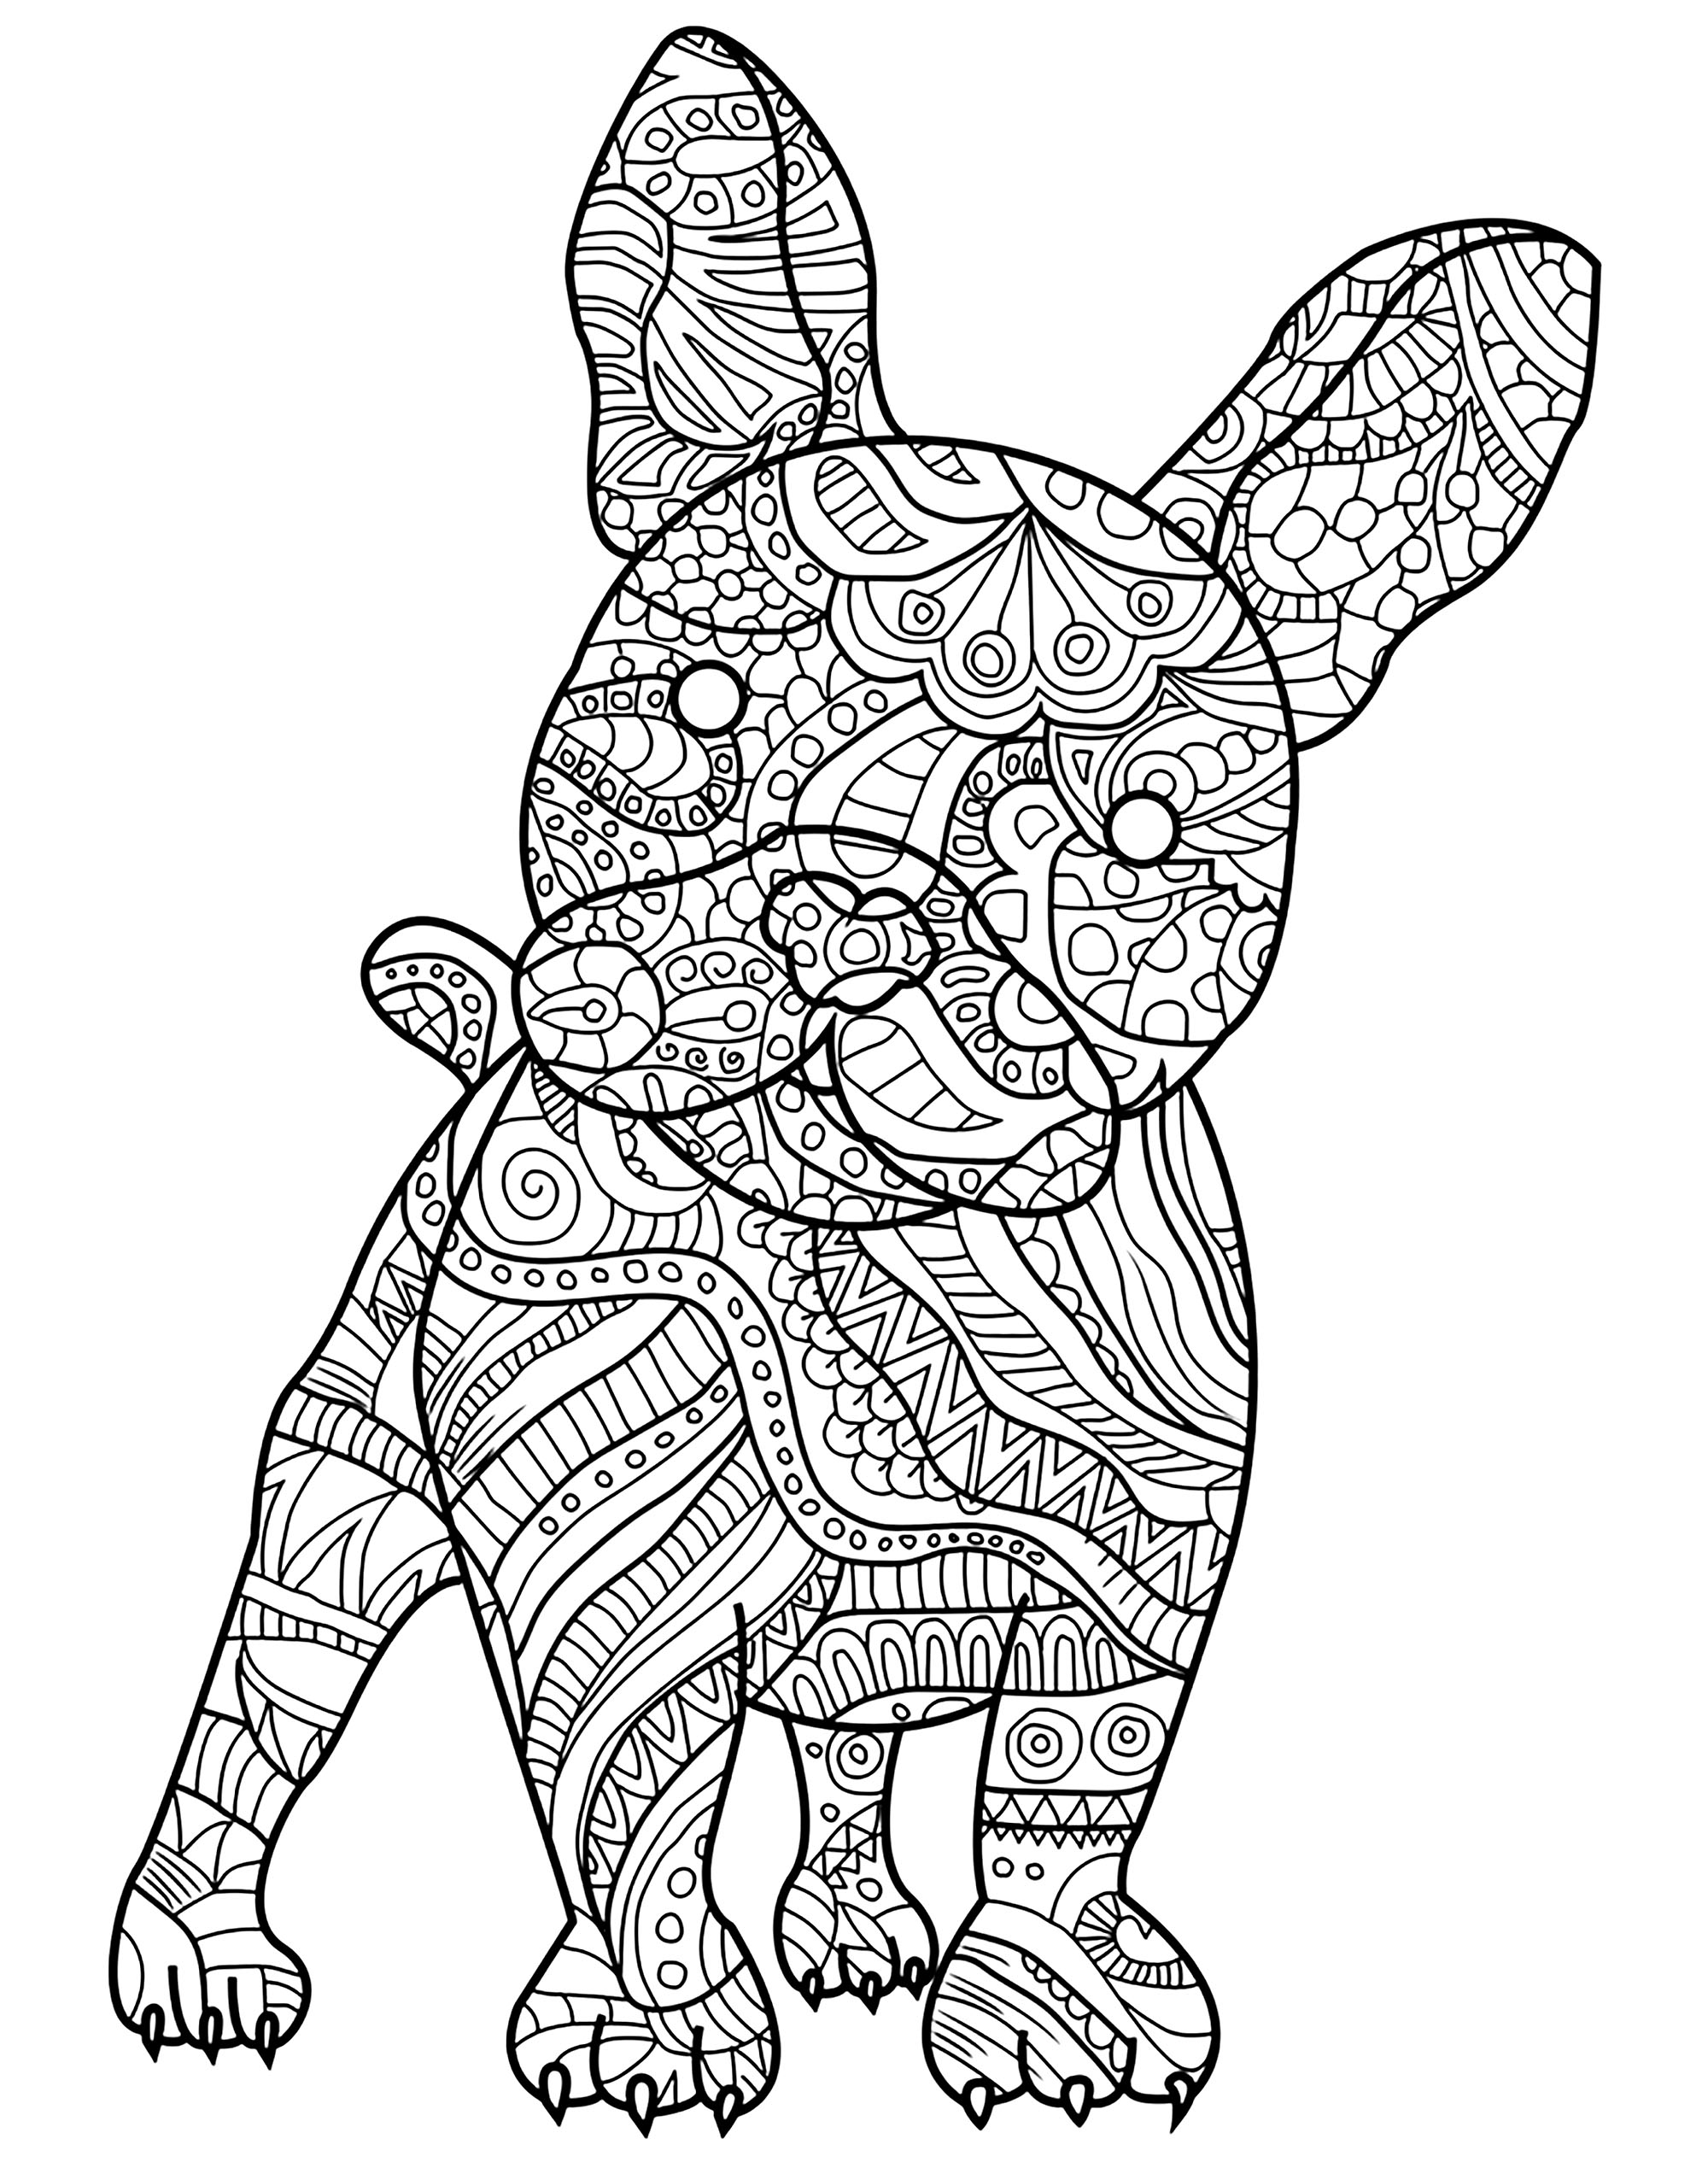 French Bulldog and its harmonious patterns - Dogs Adult Coloring Pages